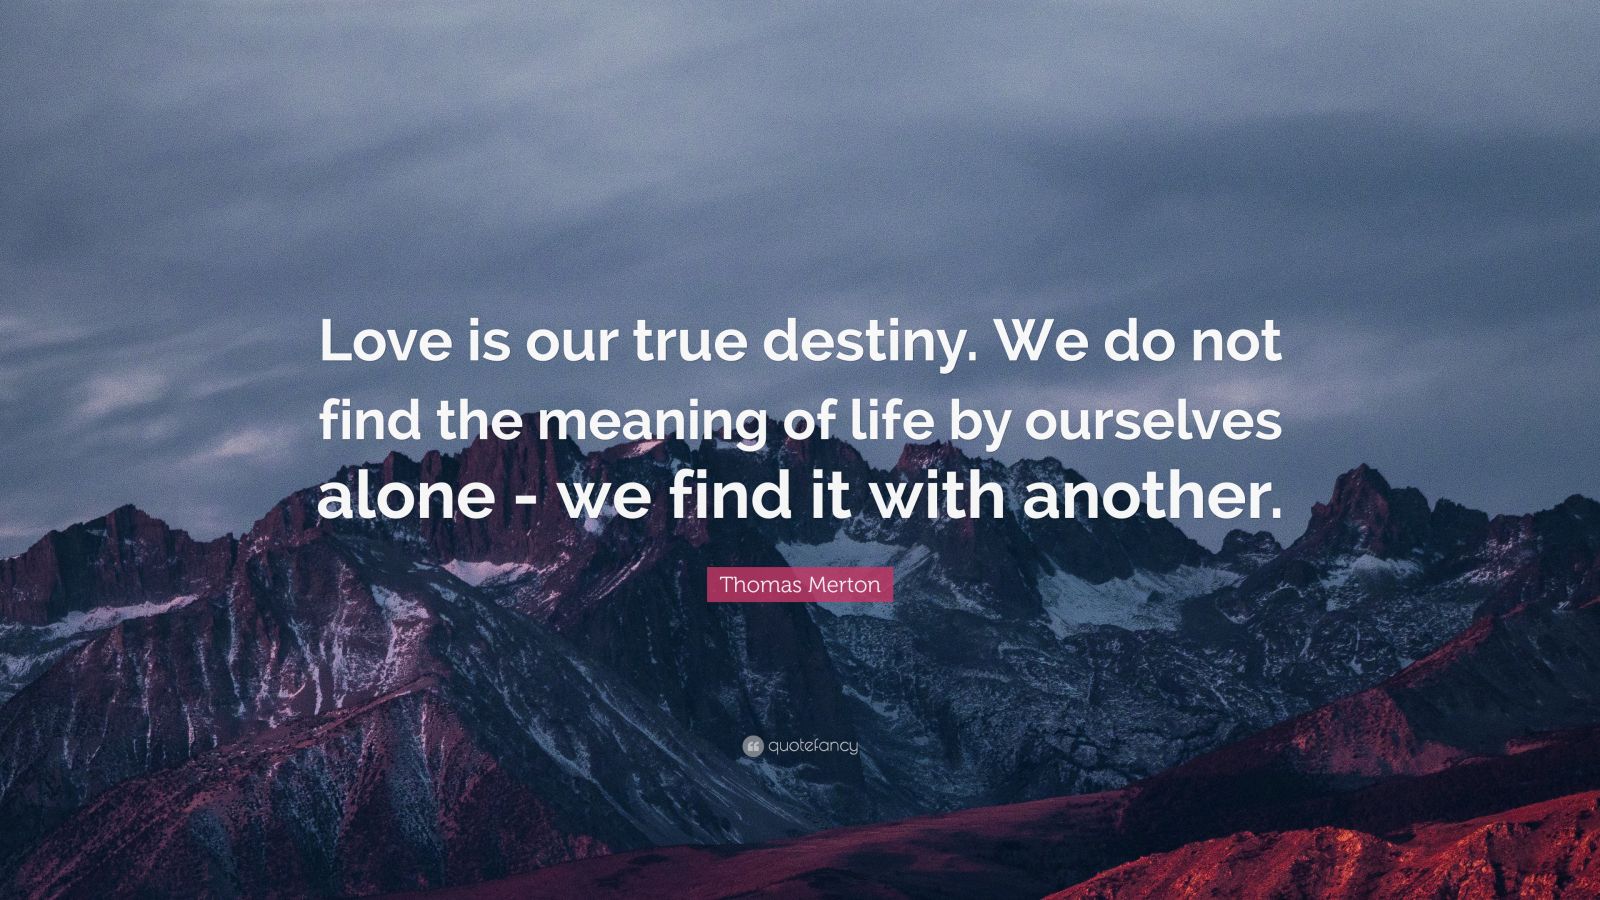 Thomas Merton Quote “Love Is Our True Destiny We Do Not